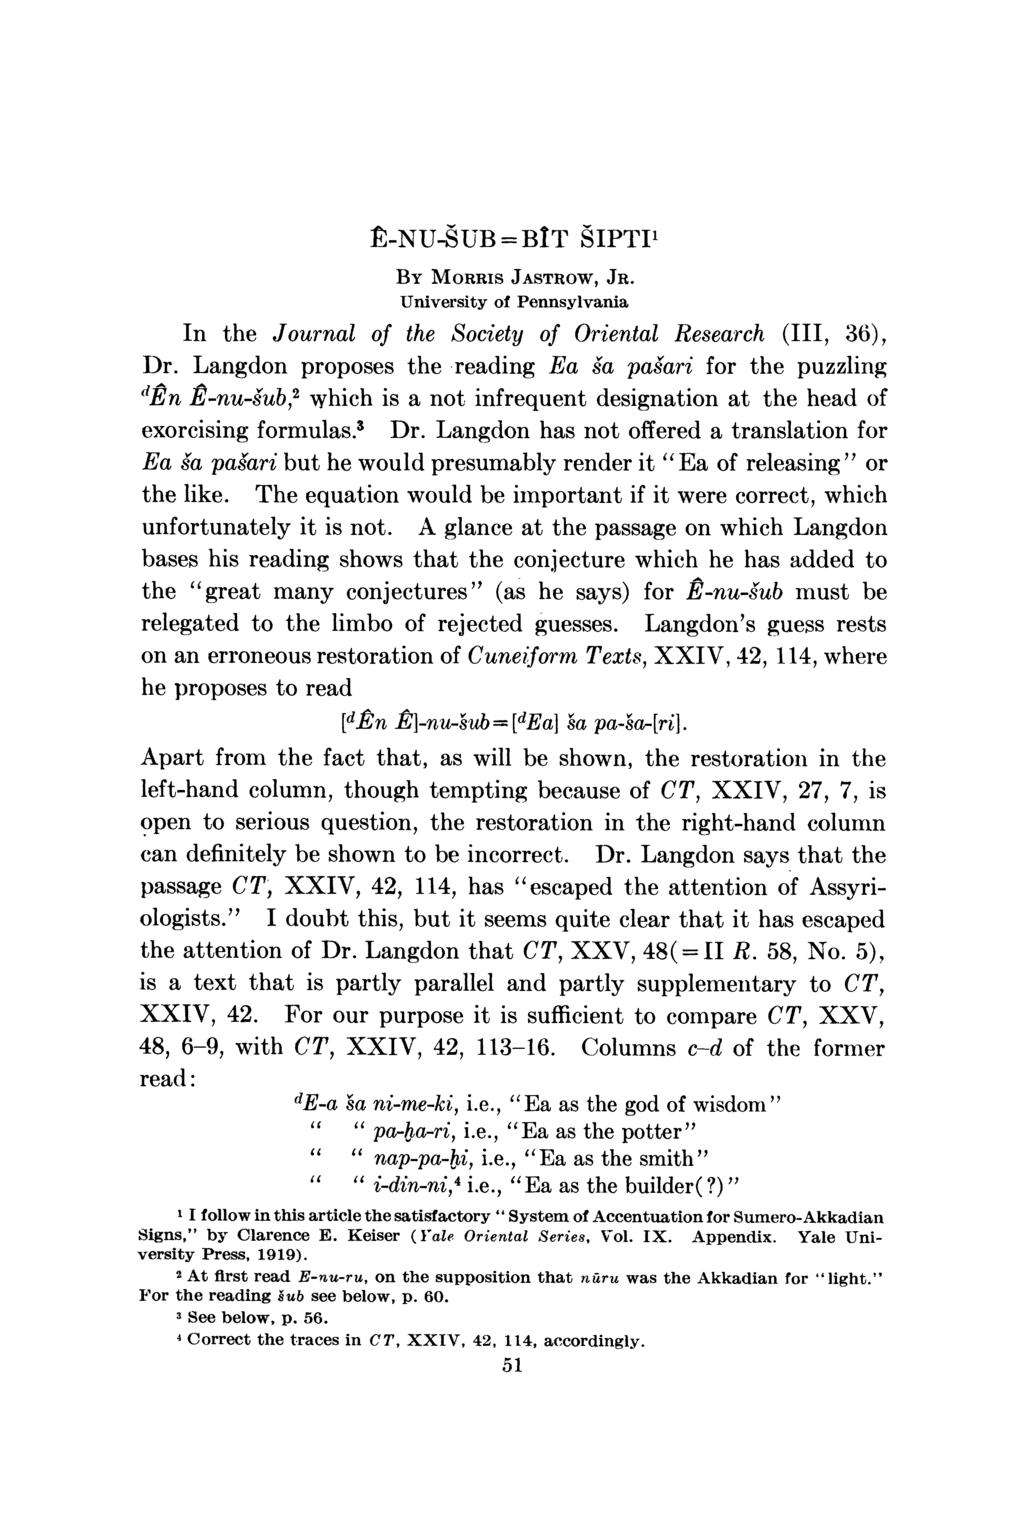 R-NU-SUB = BIT SIPTI1 BY MORRIS JASTROW, JR. University of Pennsylvania In the Journal of the Society of Oriental Research (III, 36), Dr.